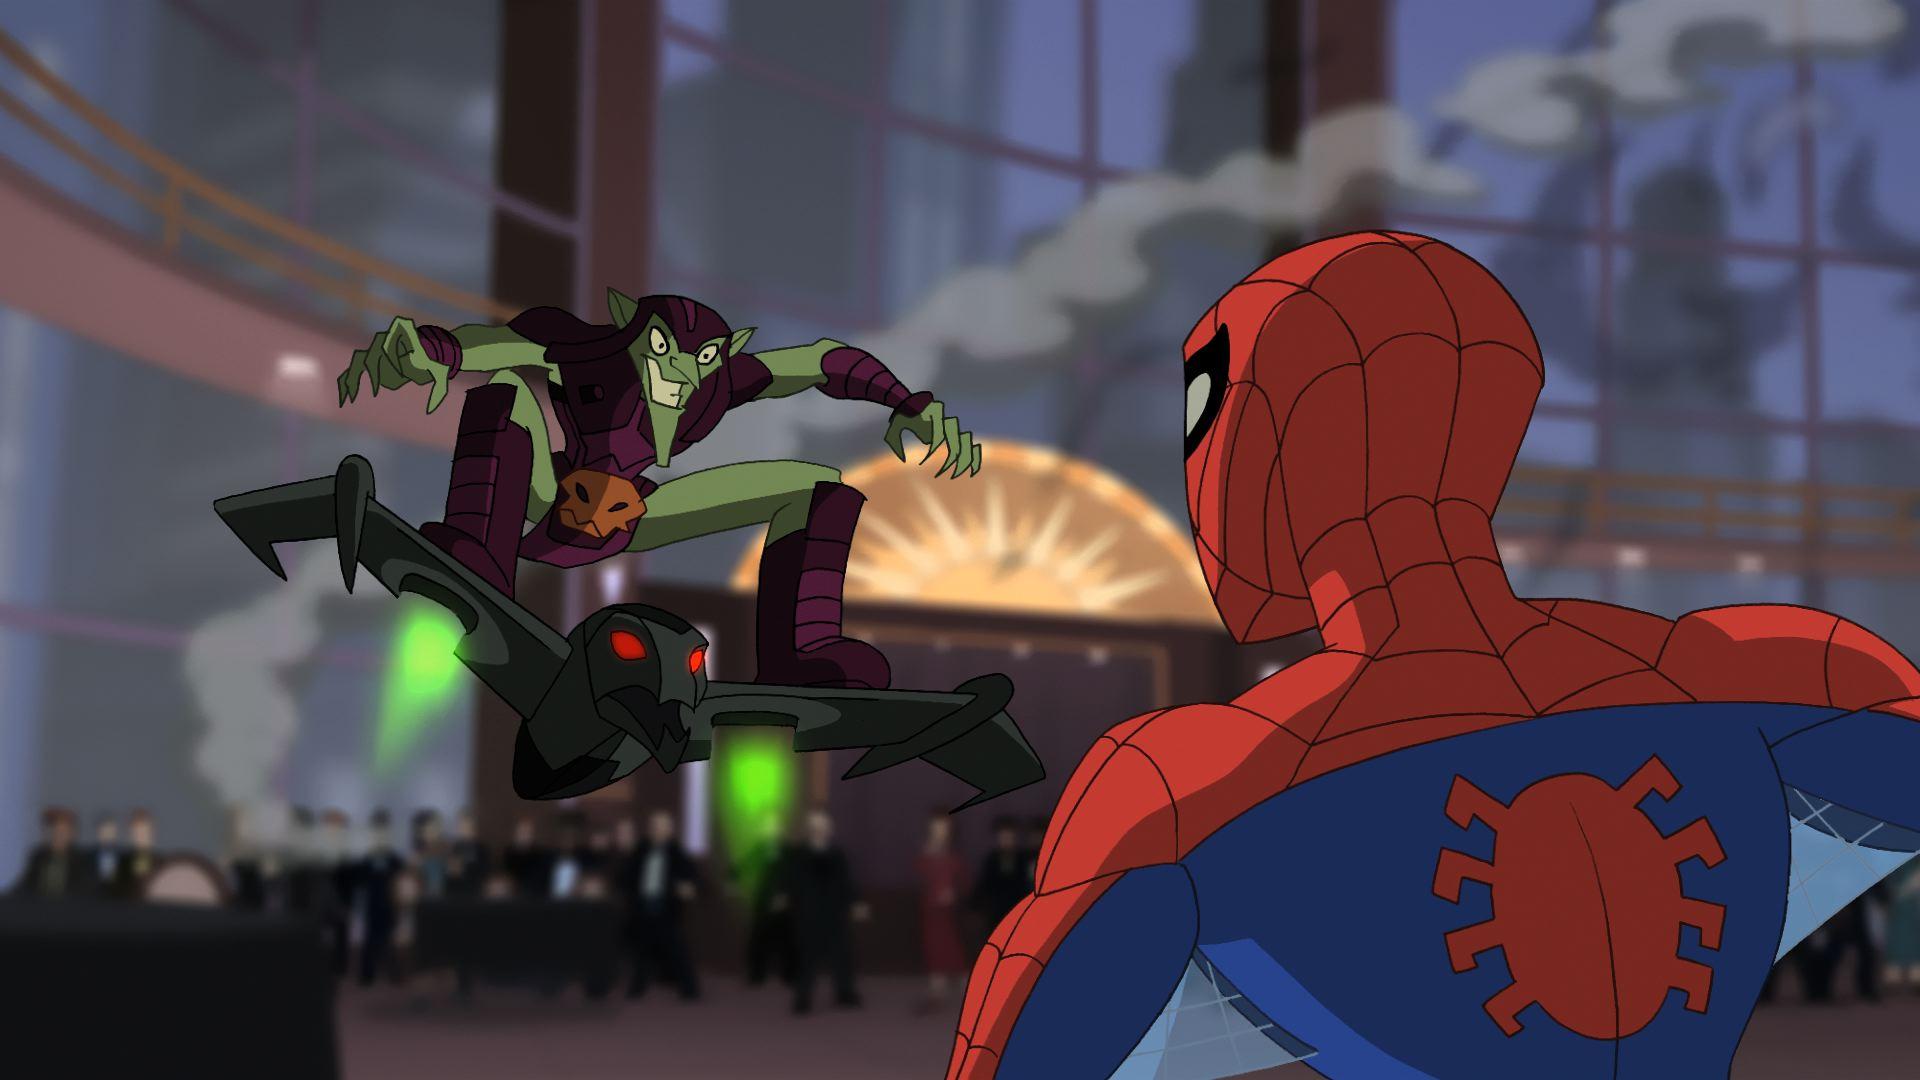 ...were released by Sony Entertainment and Marvel Animation to promote spec...